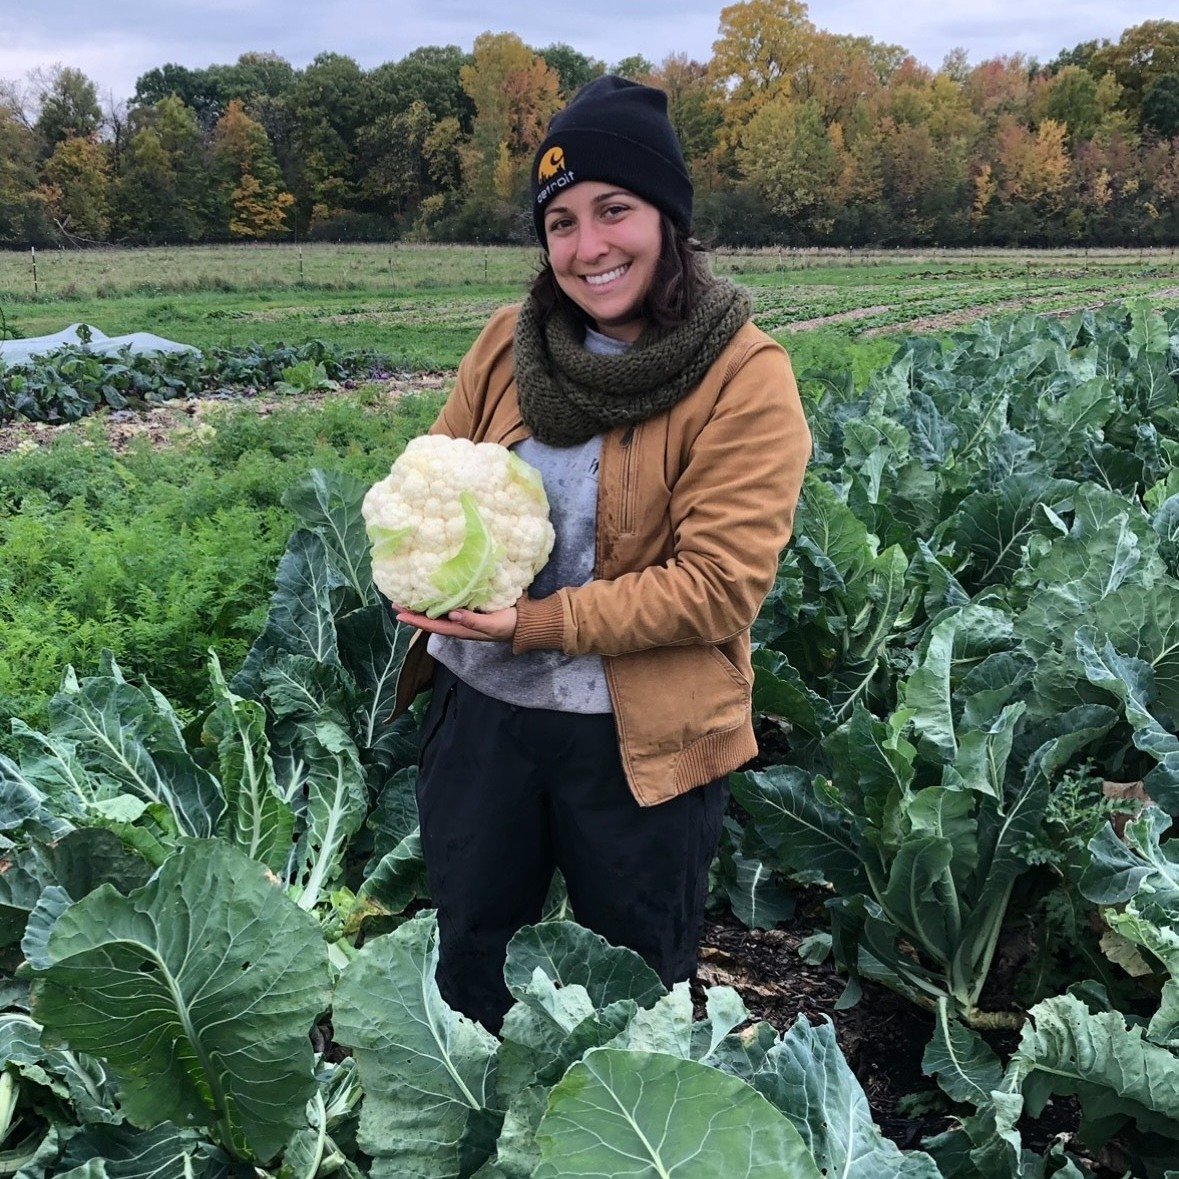 Farmer Feature 🌱

Meet Leah Fabian, this season's fearless Harvest Manager!

Born and raised in southeast Michigan, Leah developed an appreciation for food at a young age in the garden and kitchen of her grandparents. Her passion for a more sustaina